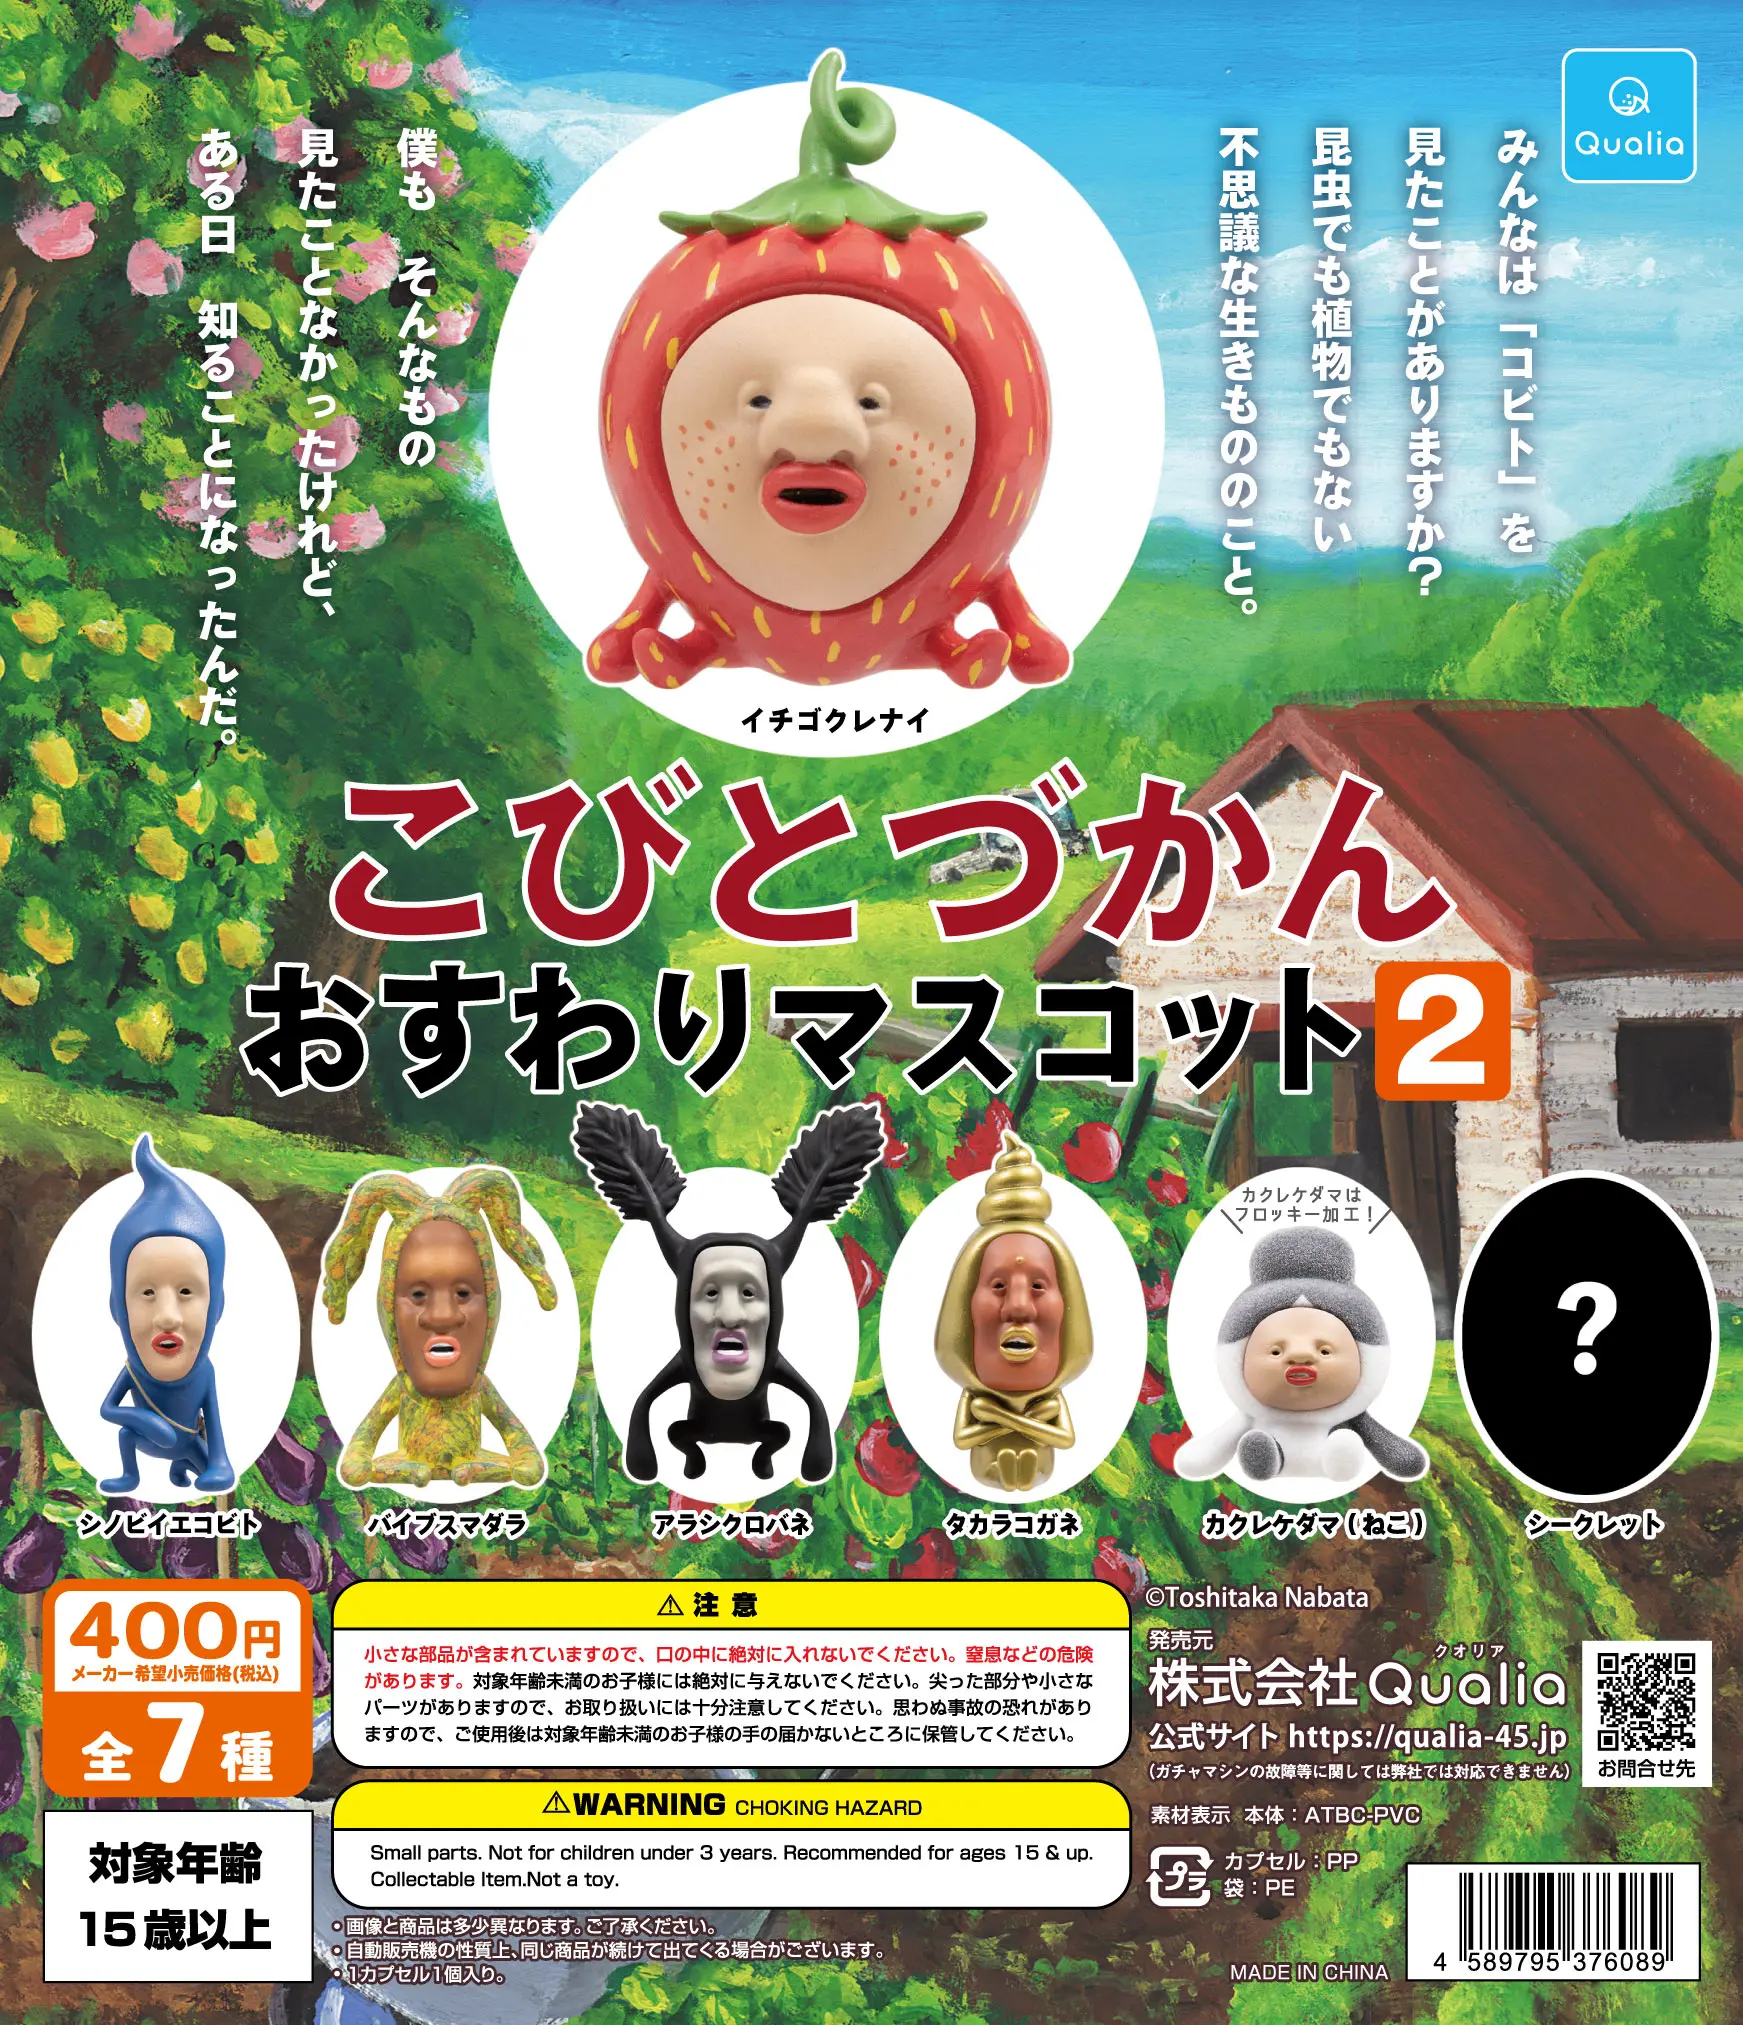 

Qualia capsule toys funny Kobitozukan Sit Mascot 2 mysterious farm creatures neither an insect nor a plant gashapon figures